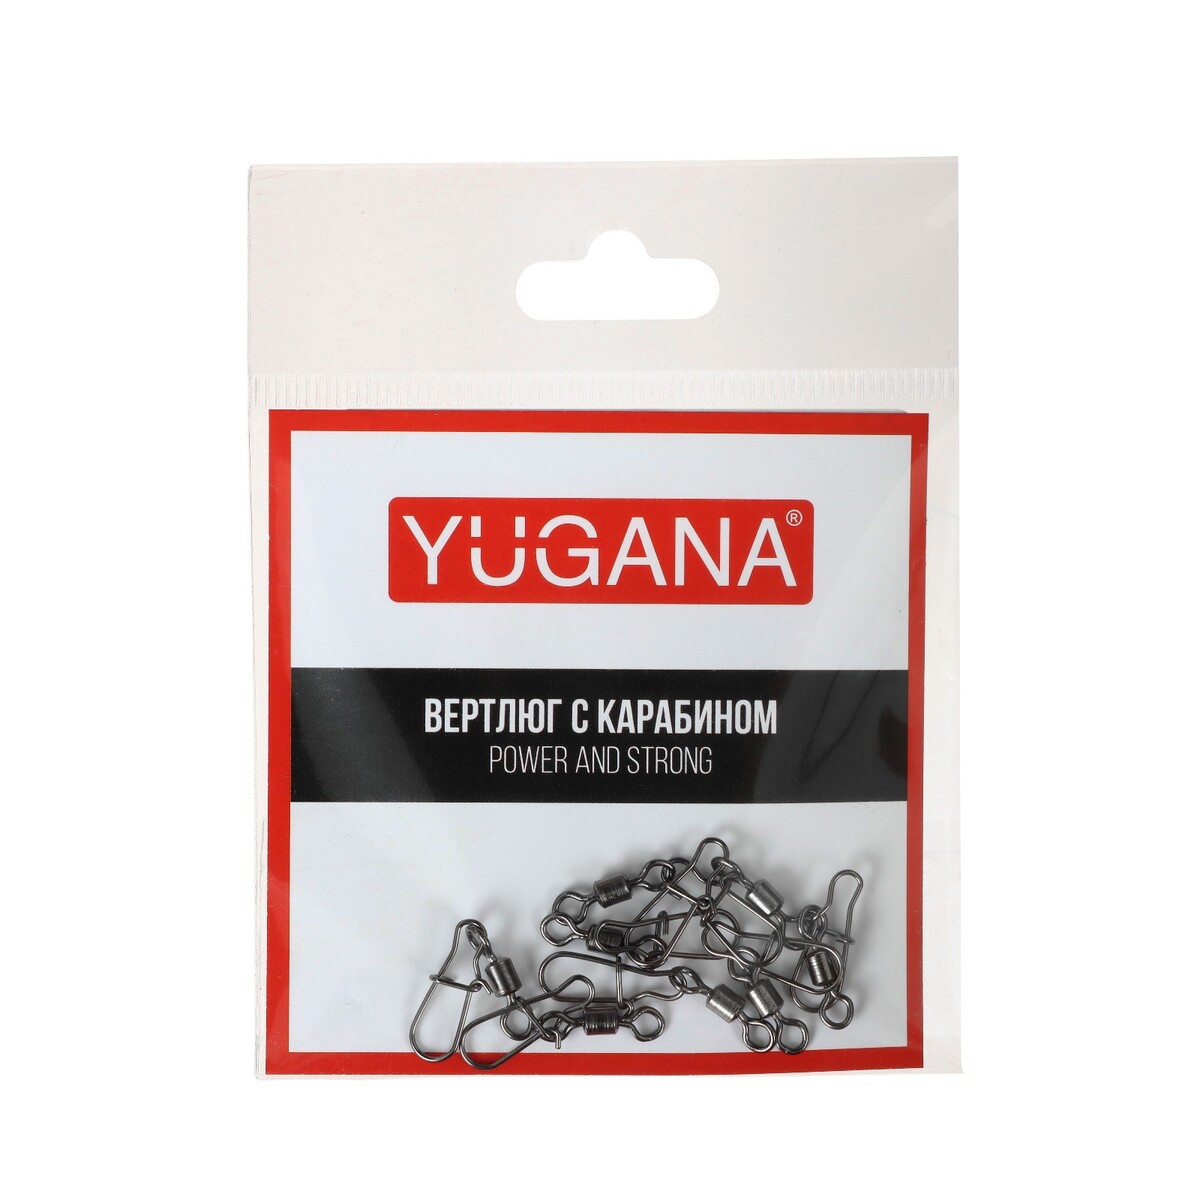 Карабин с вертлюгом yugana swivel with snap №6, 20 кг, 8 шт. 100pcs white gold plate silver color rectangle paper label price tag with rope jewelry gift card handmade diy baking accessories